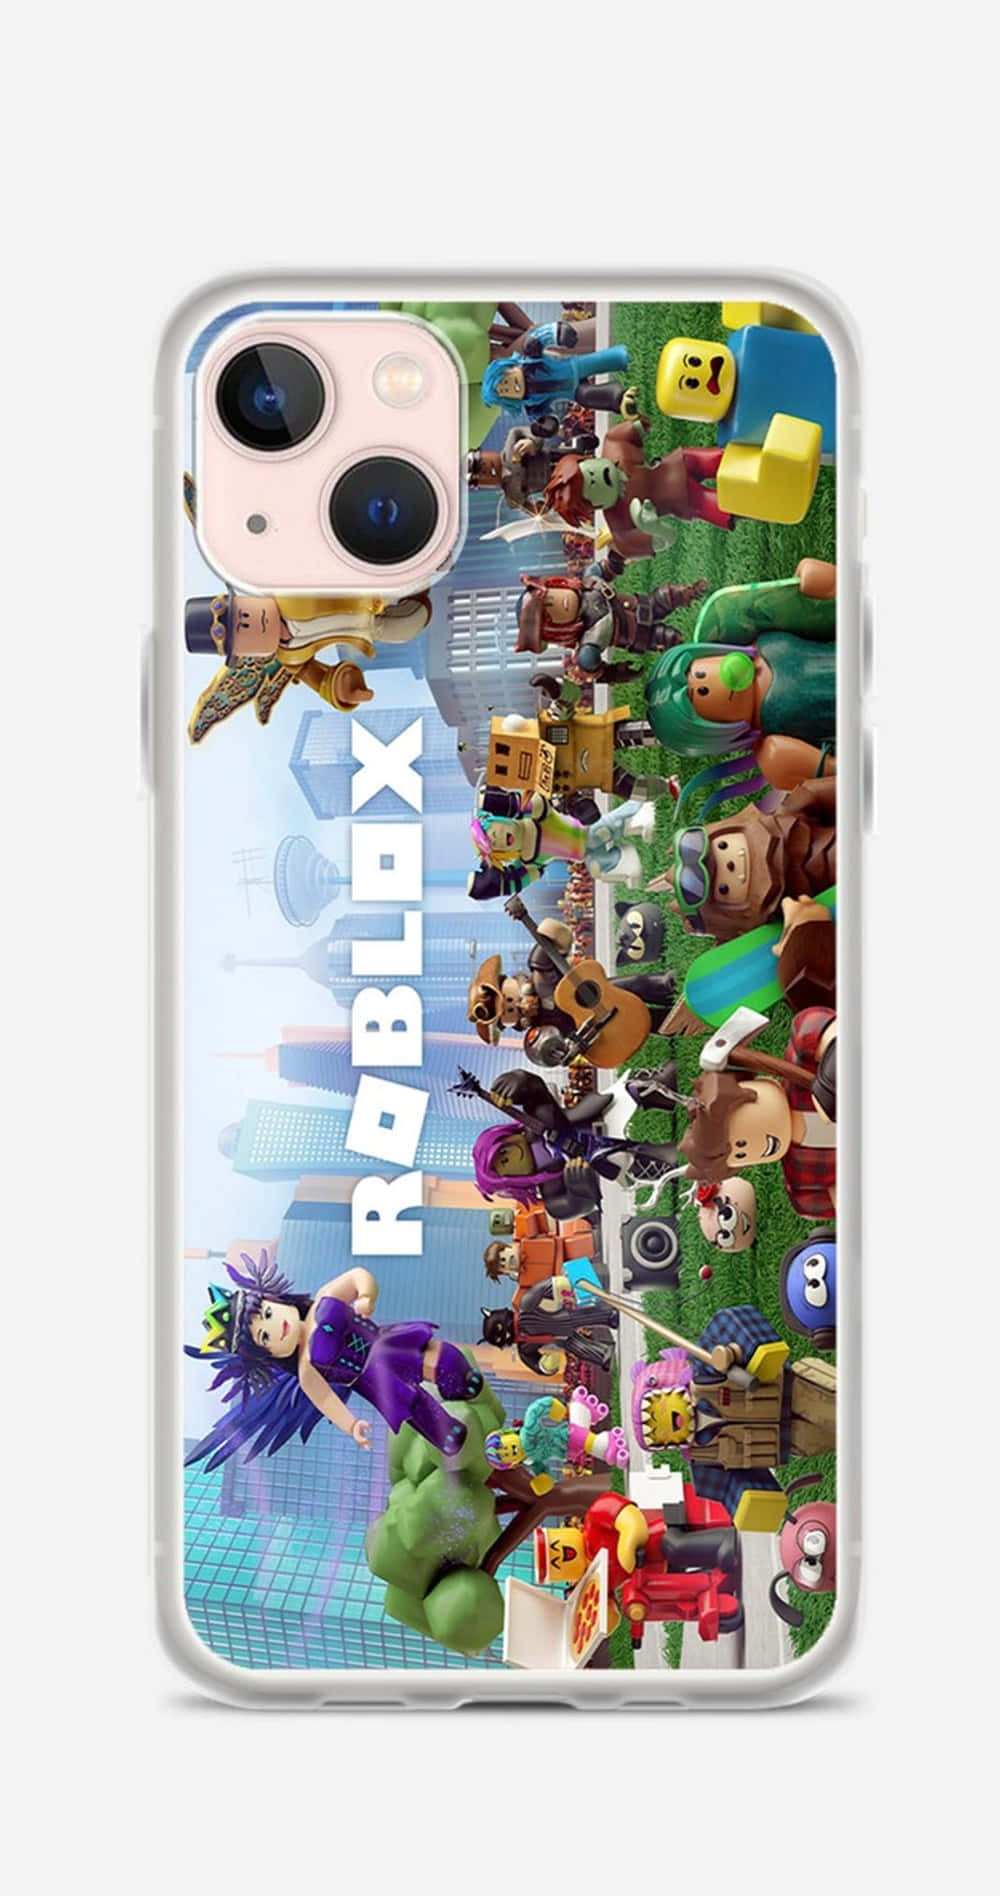 Roblox Iconic Characters Poster Iphone Wallpaper